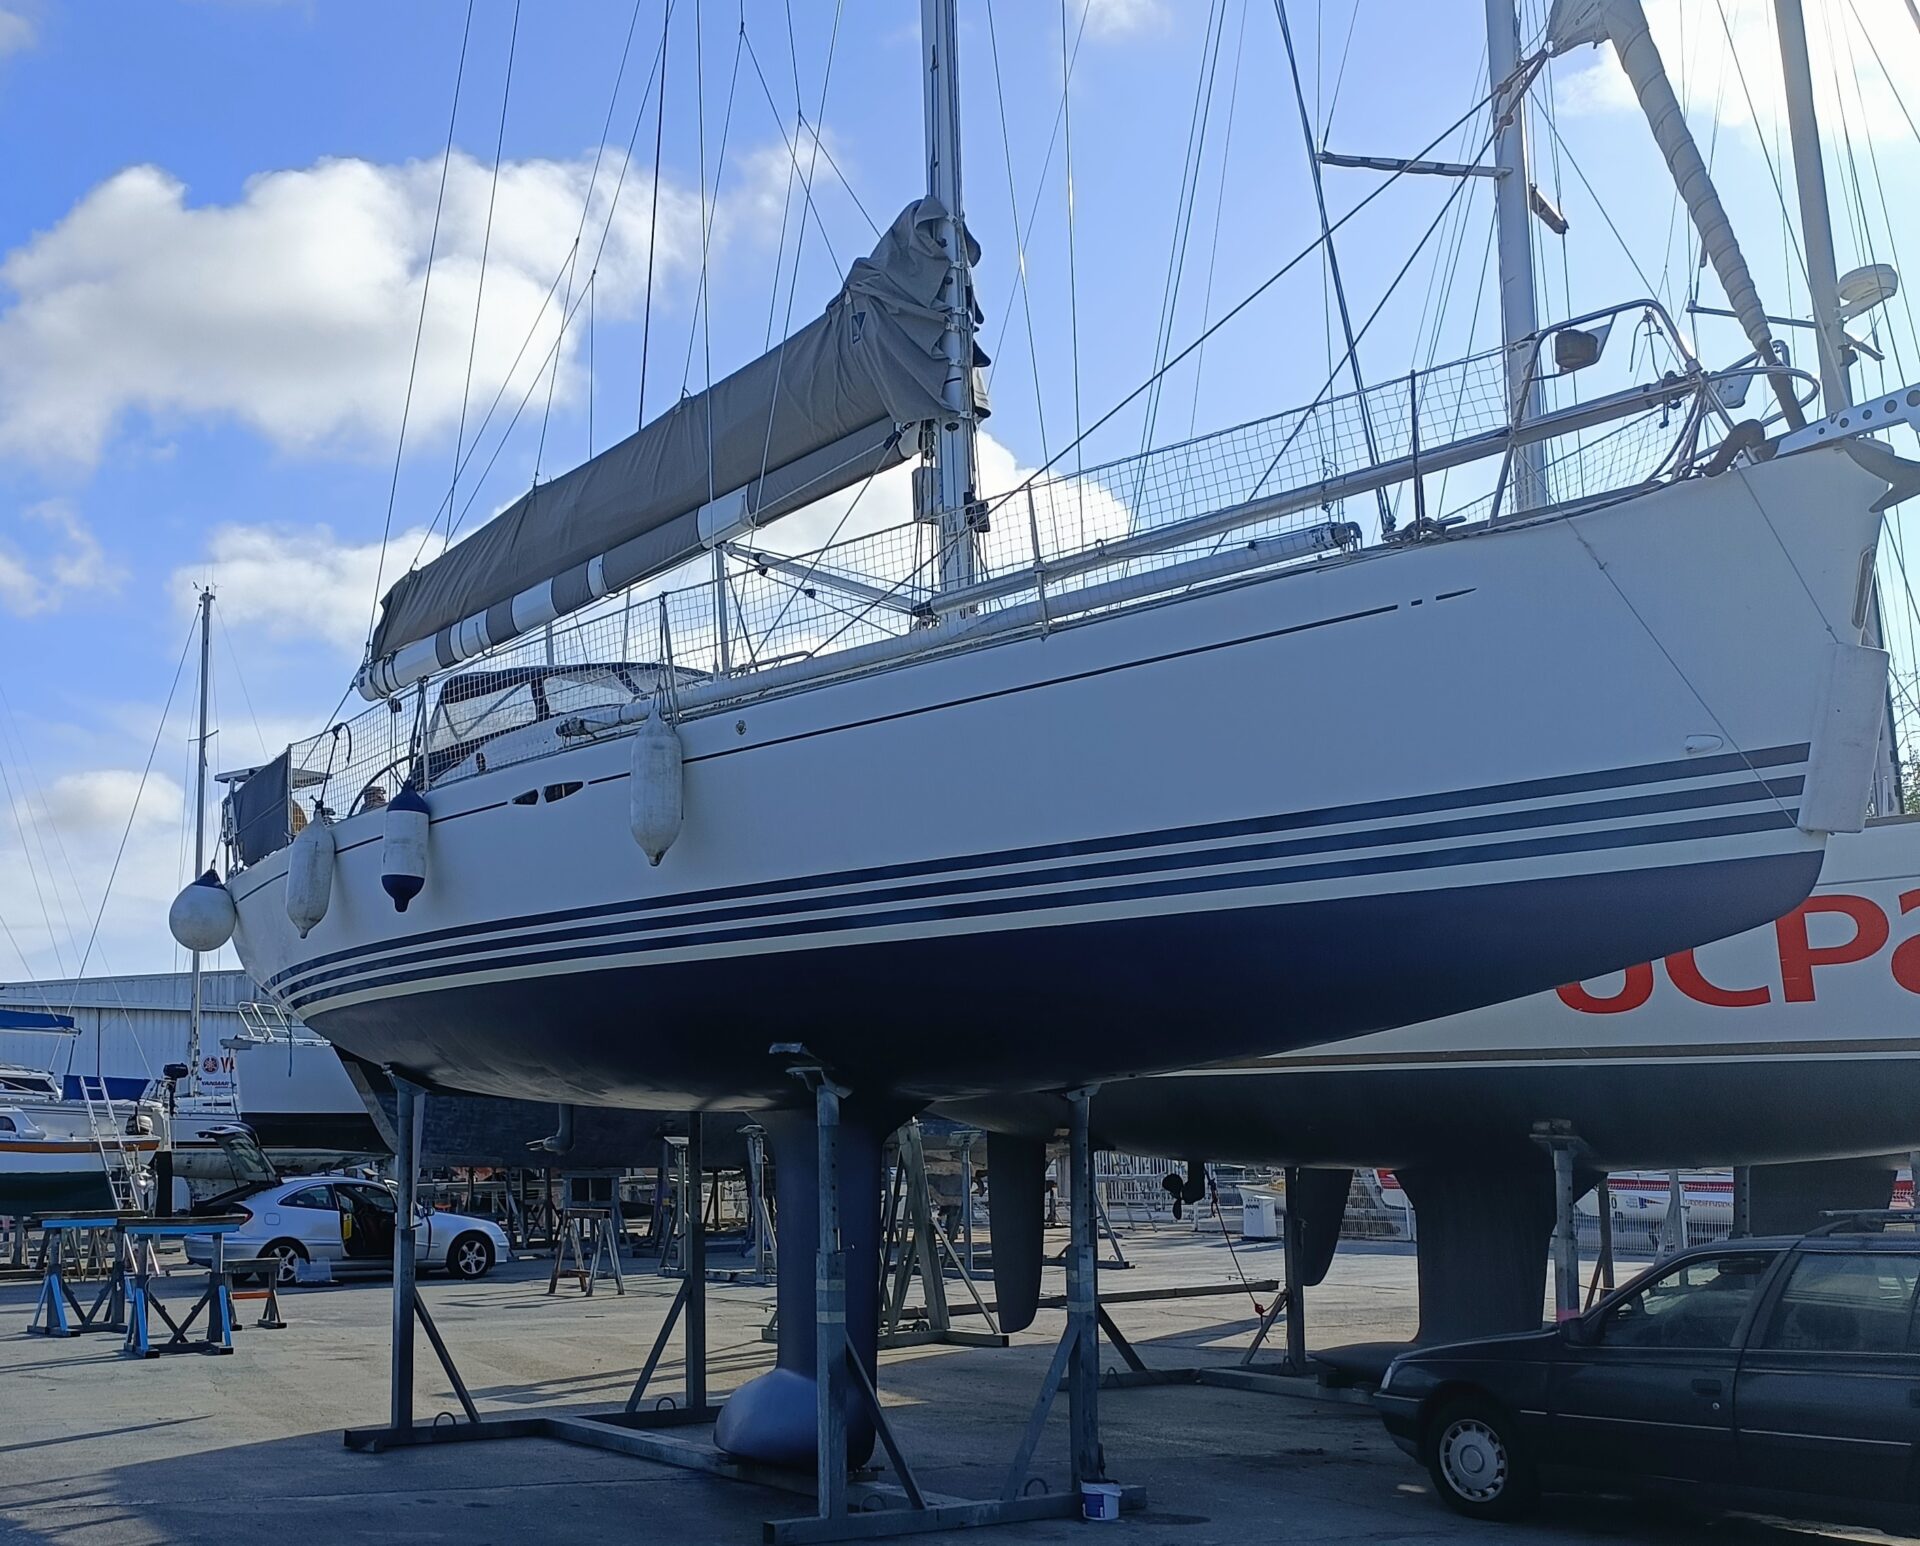 xc 45 yacht for sale